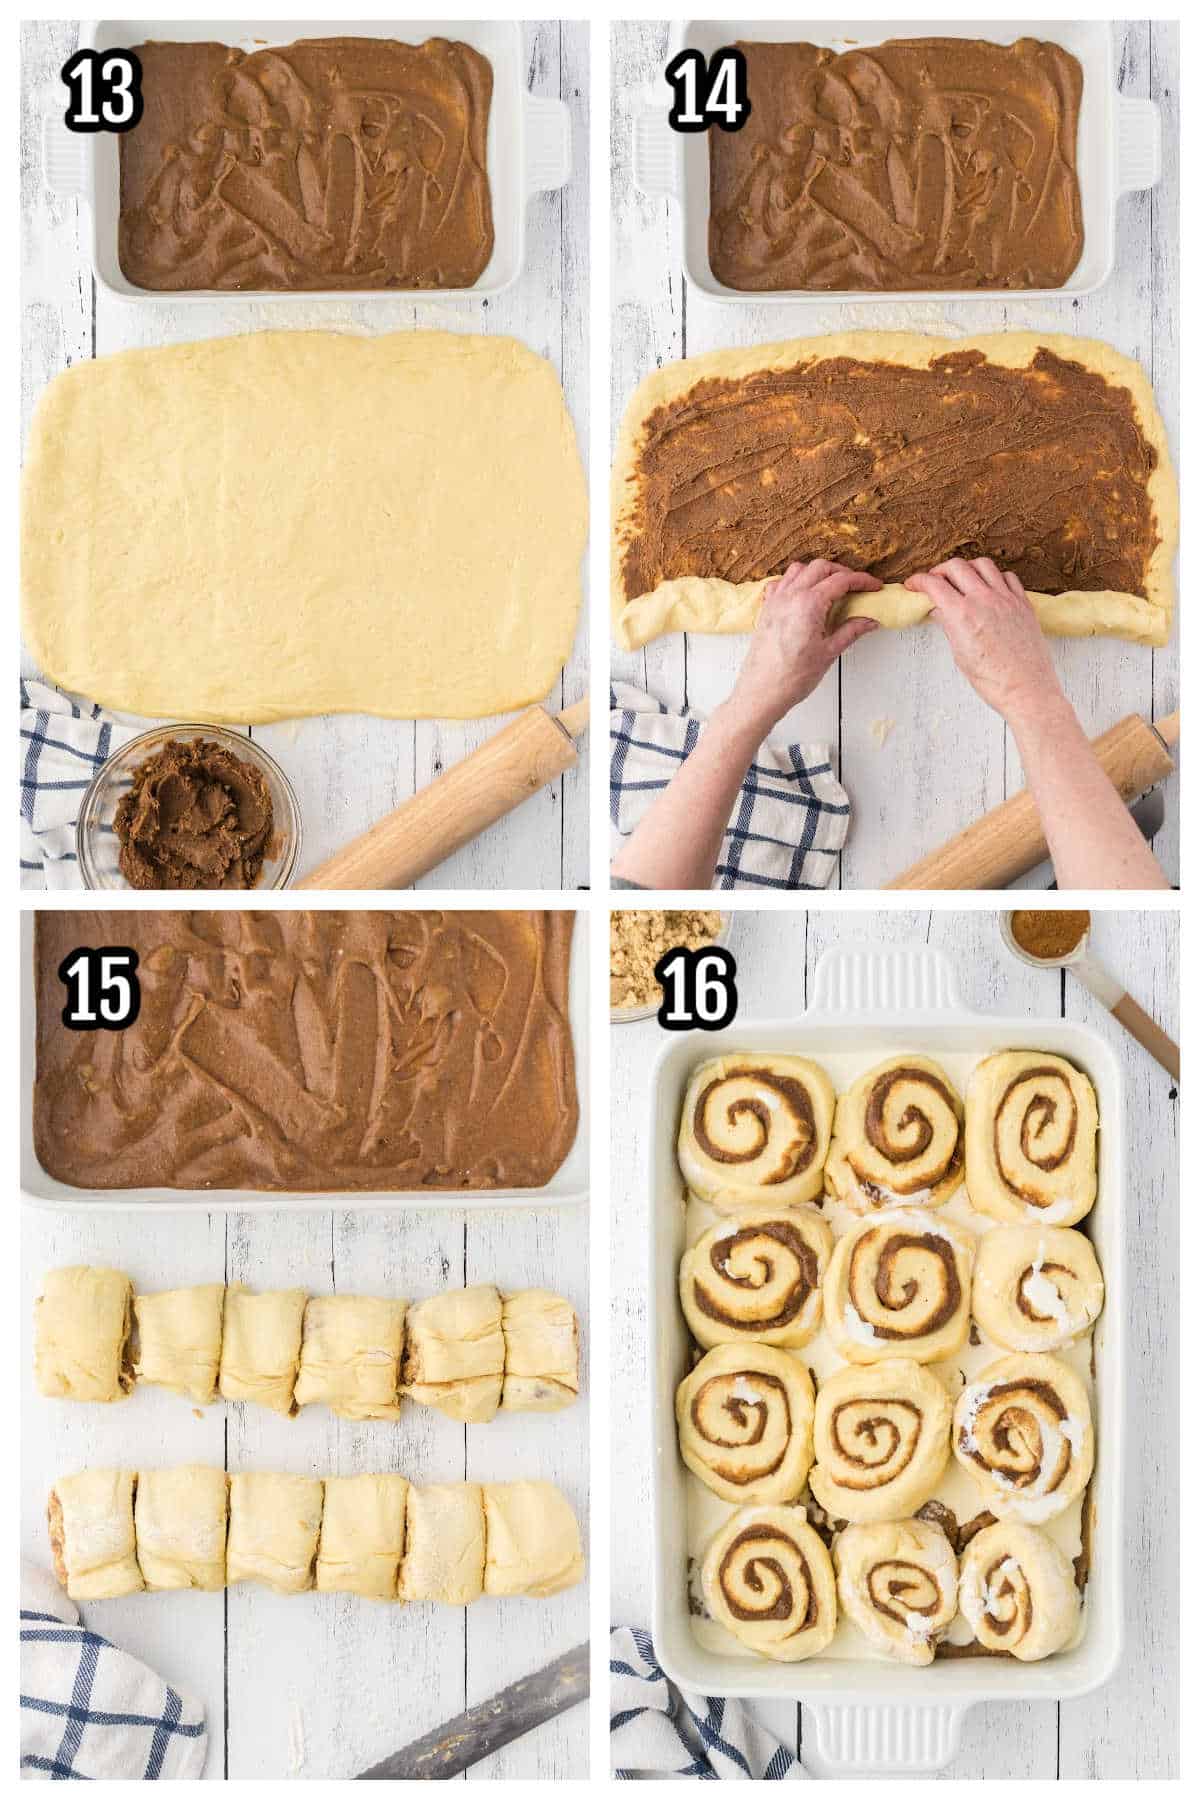 The fourth collage shows steps to spread the filling and cut the rolls for the homemade cinnamon buns. 